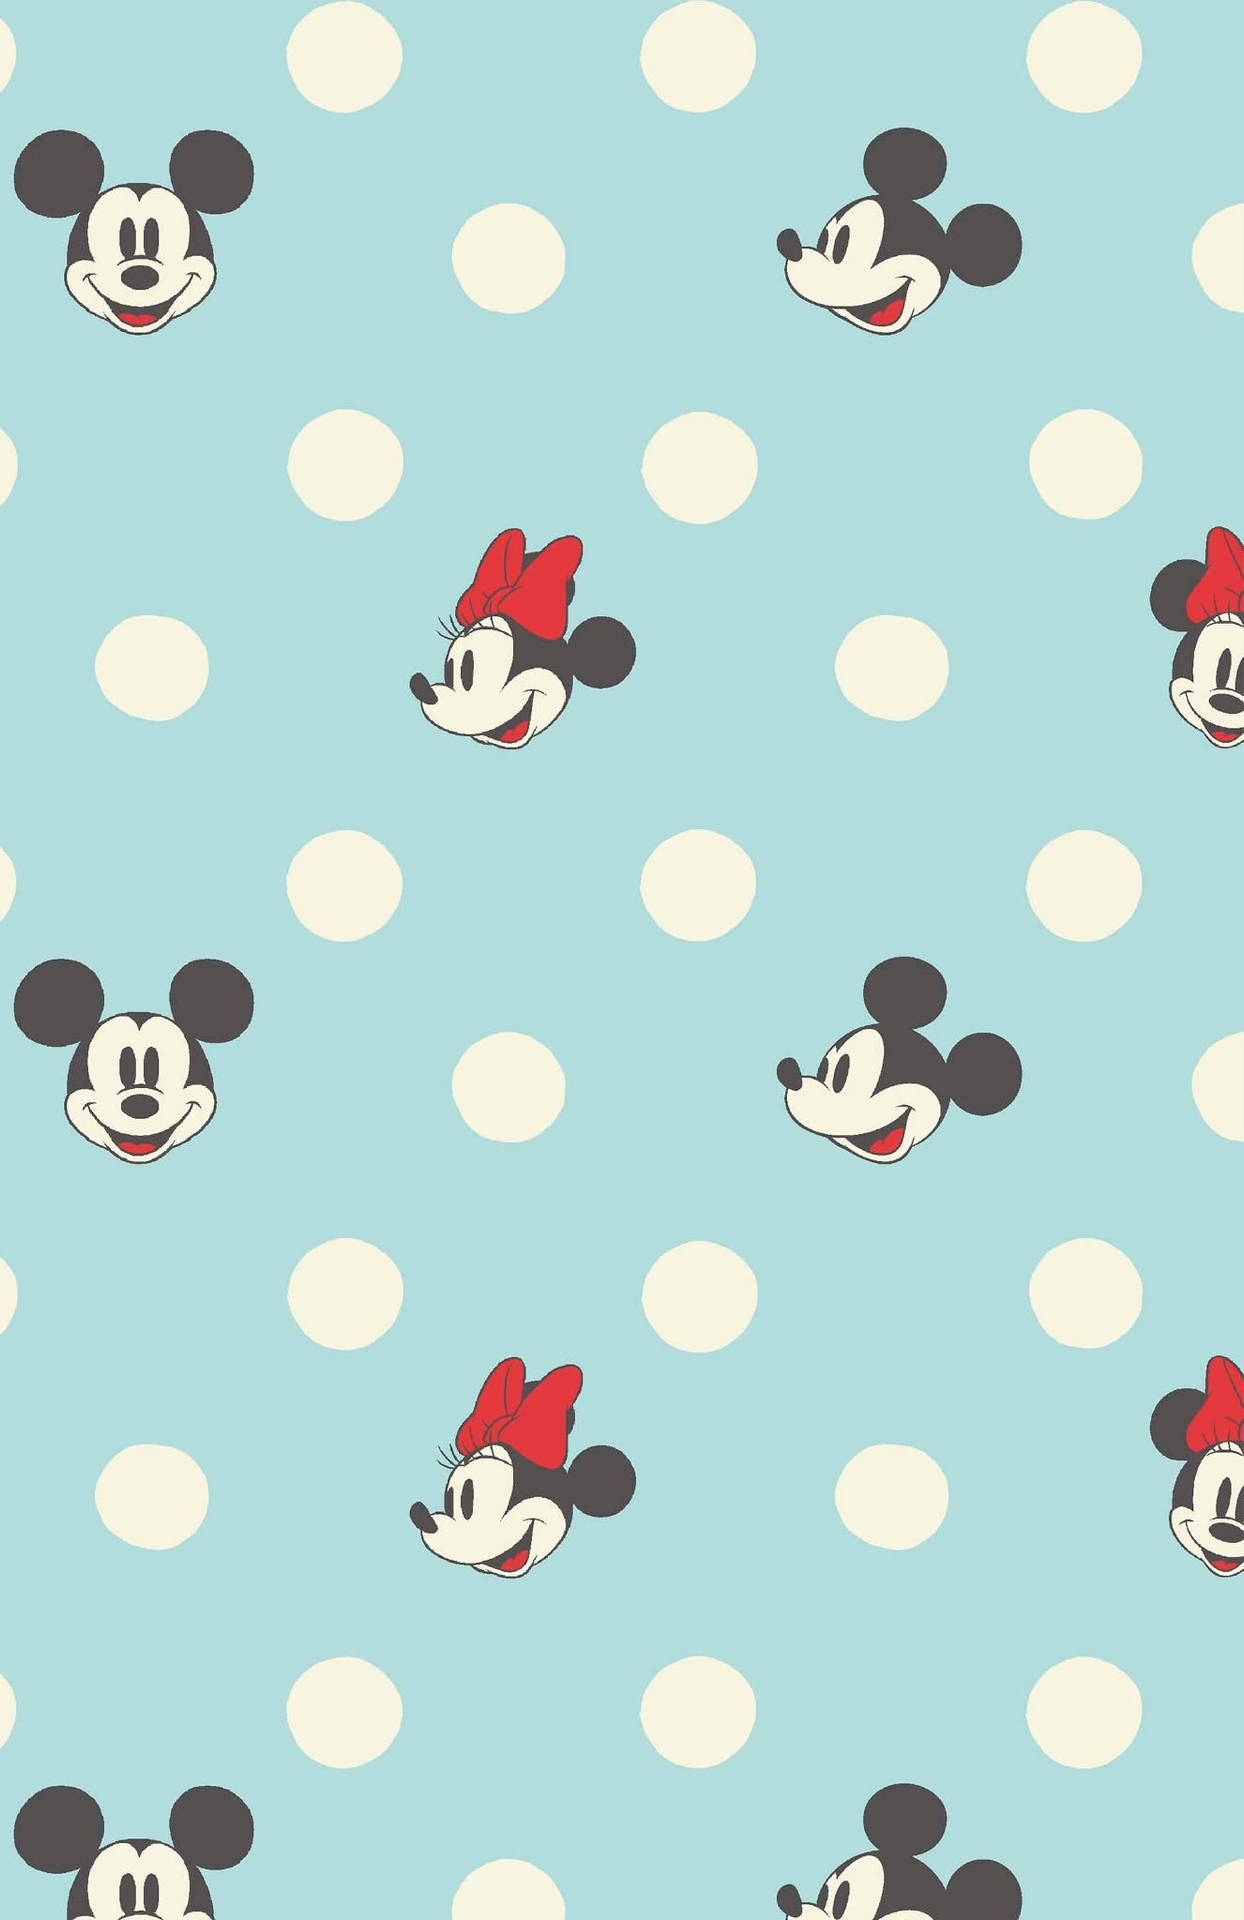 Discover the magic of Disney with this colorful pattern! Wallpaper